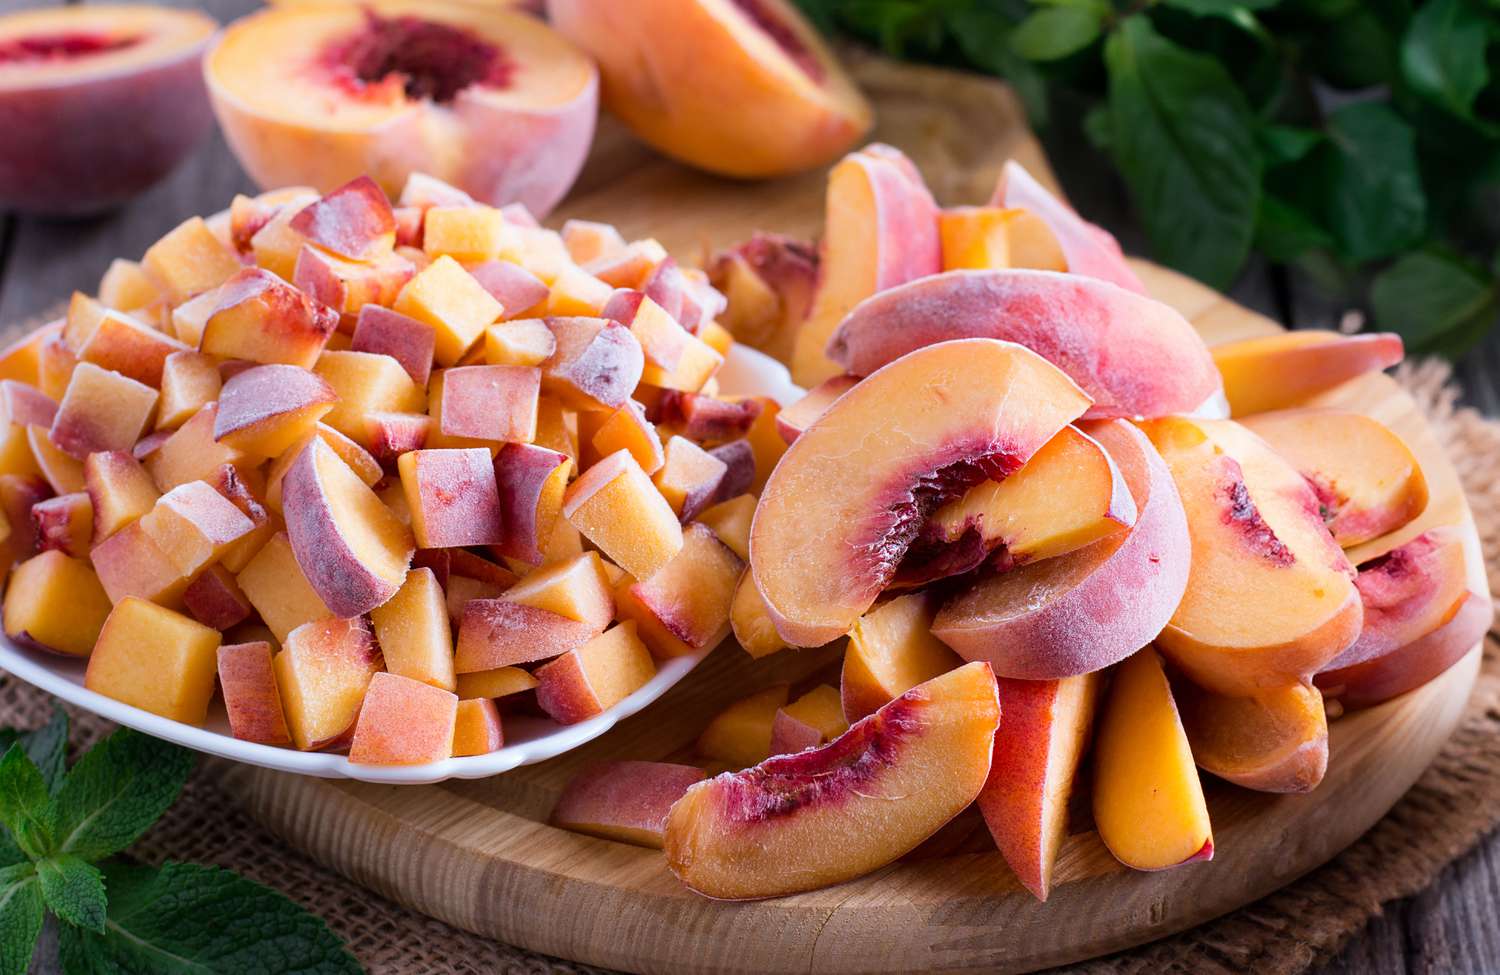 How to Freeze Peaches So You Can Enjoy Their Sweet, Juicy Flavor Year-Round